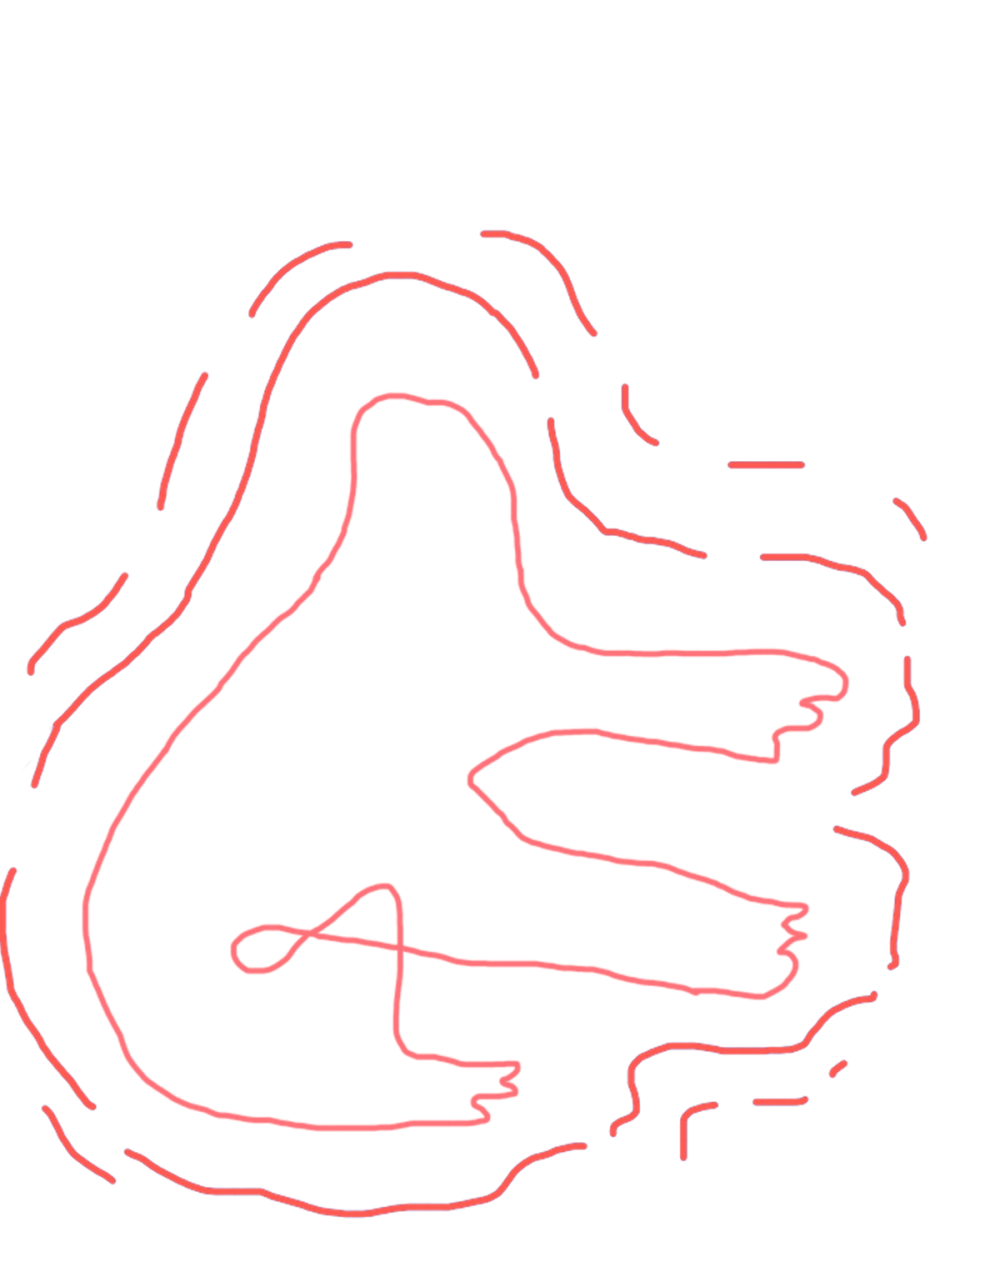 An abstract red line drawing of a figure with a head, two arms, and a leg. The figure is crouching, reaching its arms out in front, and is surrounded by wavy lines.